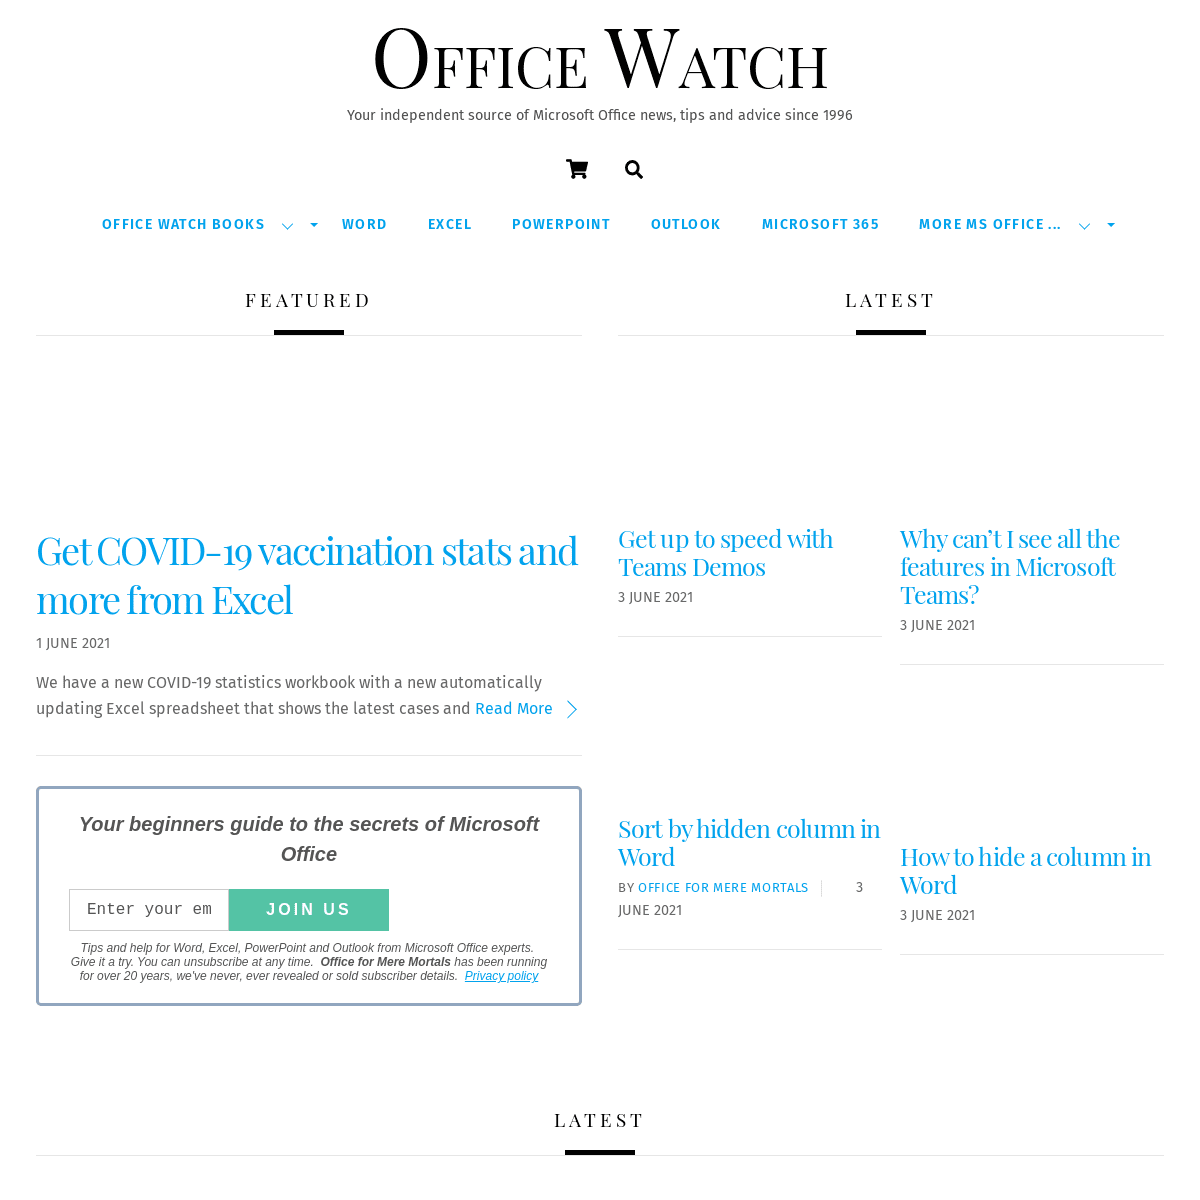 A complete backup of https://office-watch.com